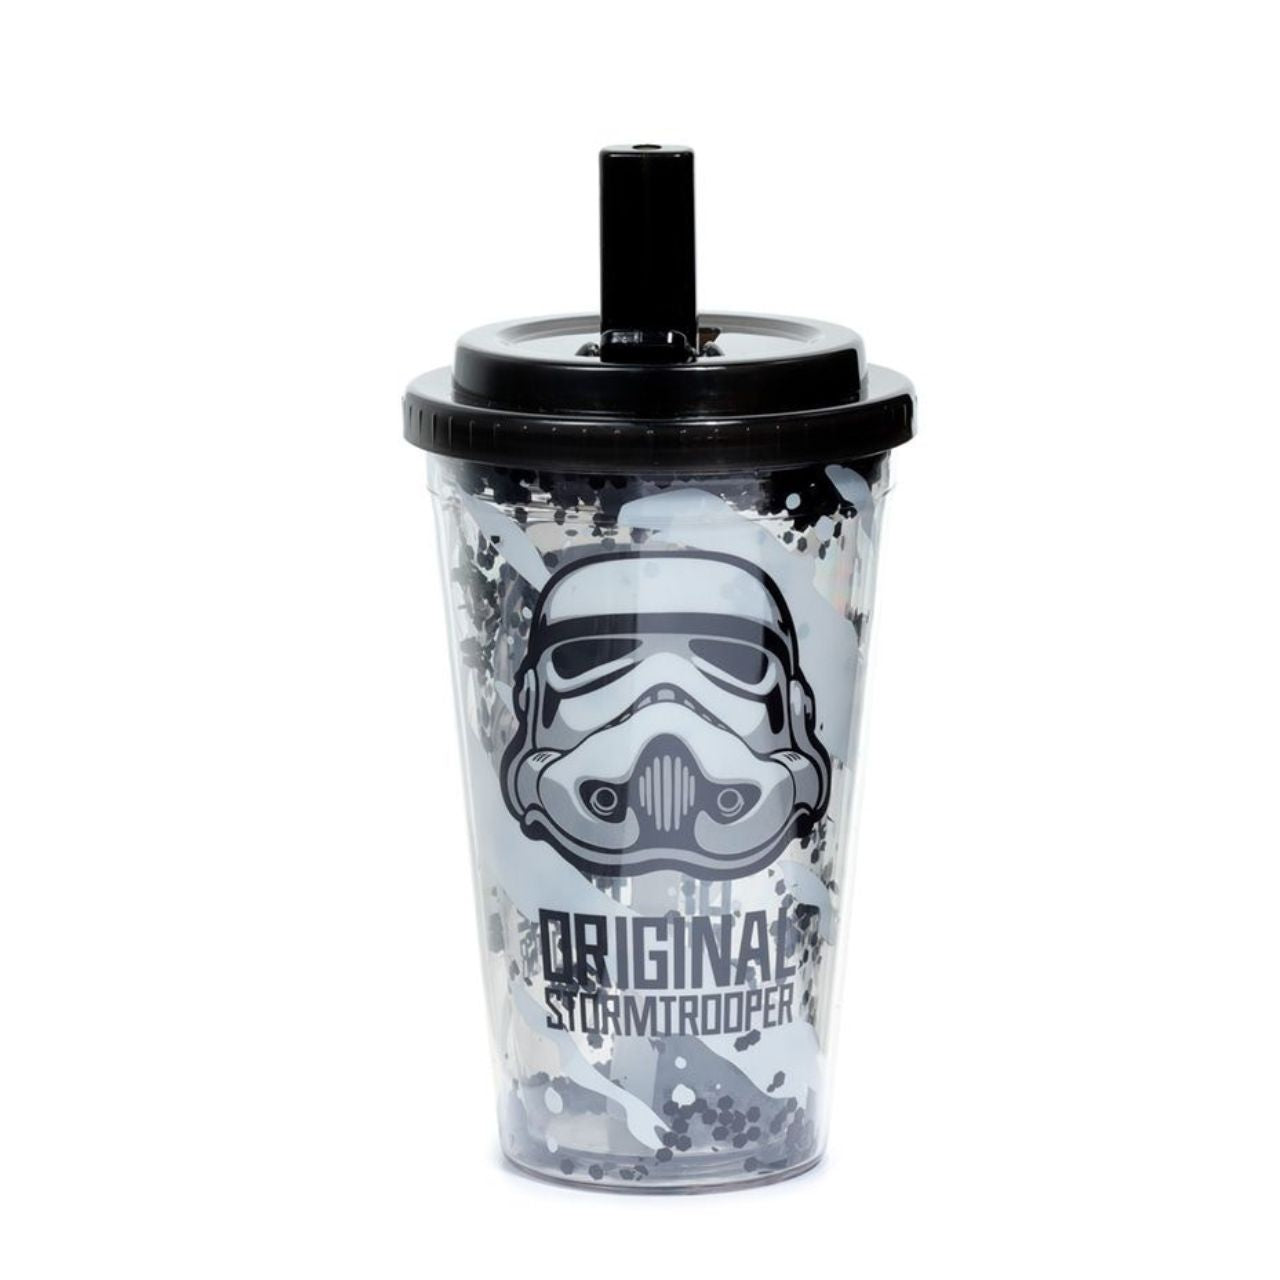 Shatterproof The Original Stormtrooper Double Walled Cup & Straw  Our double walled cups keep cold liquids cooler for longer. They are not suitable for hot liquids.